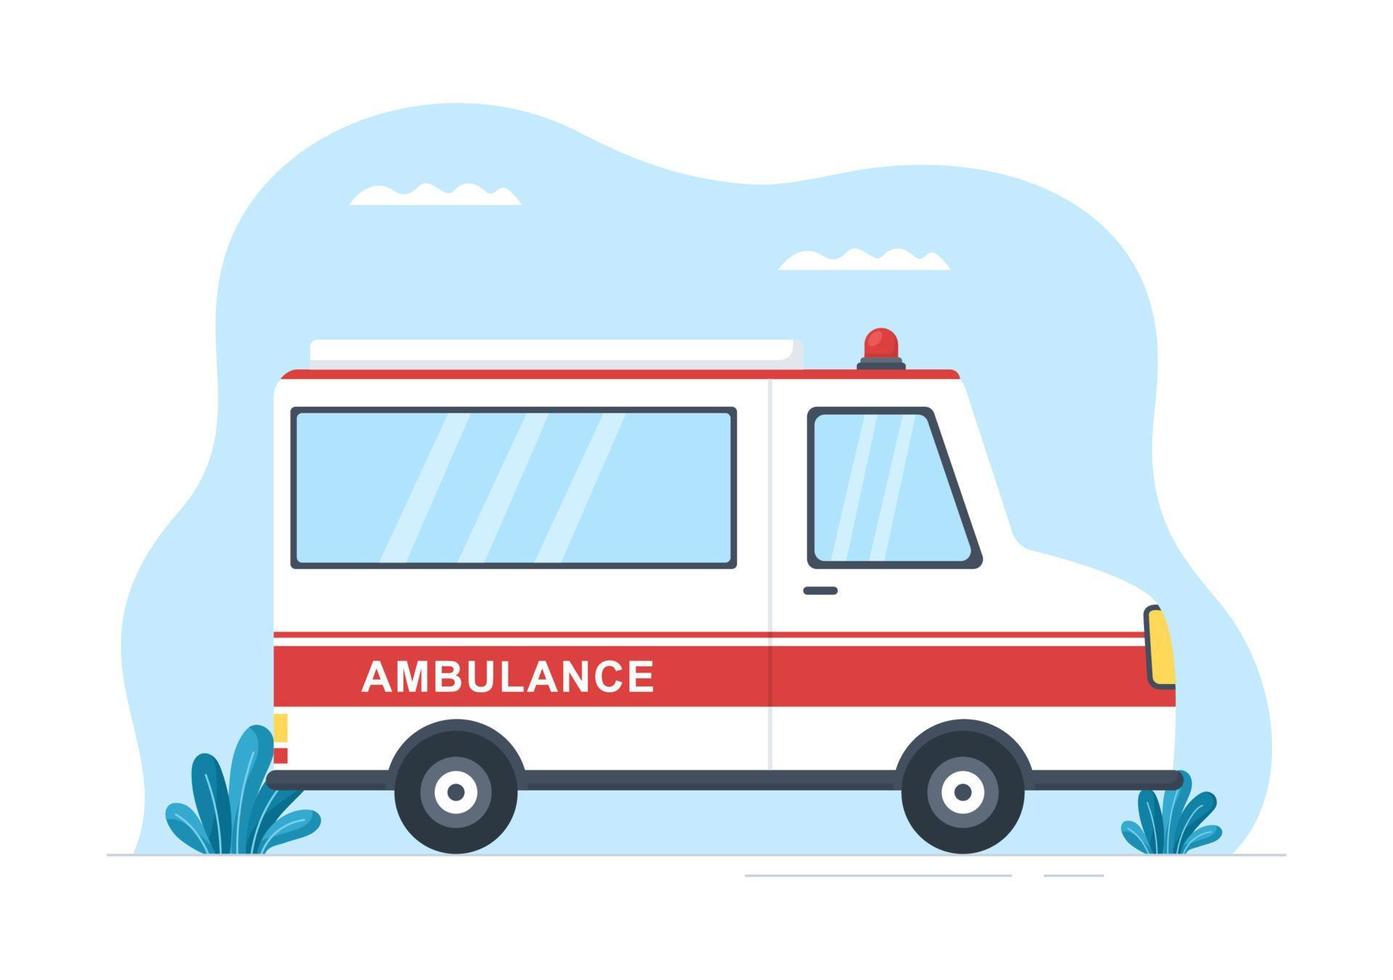 Medical Vehicle Ambulance Car or Emergency Service for Pick Up Patient the Injured in an Accident in Flat Cartoon Hand Drawn Templates Illustration vector